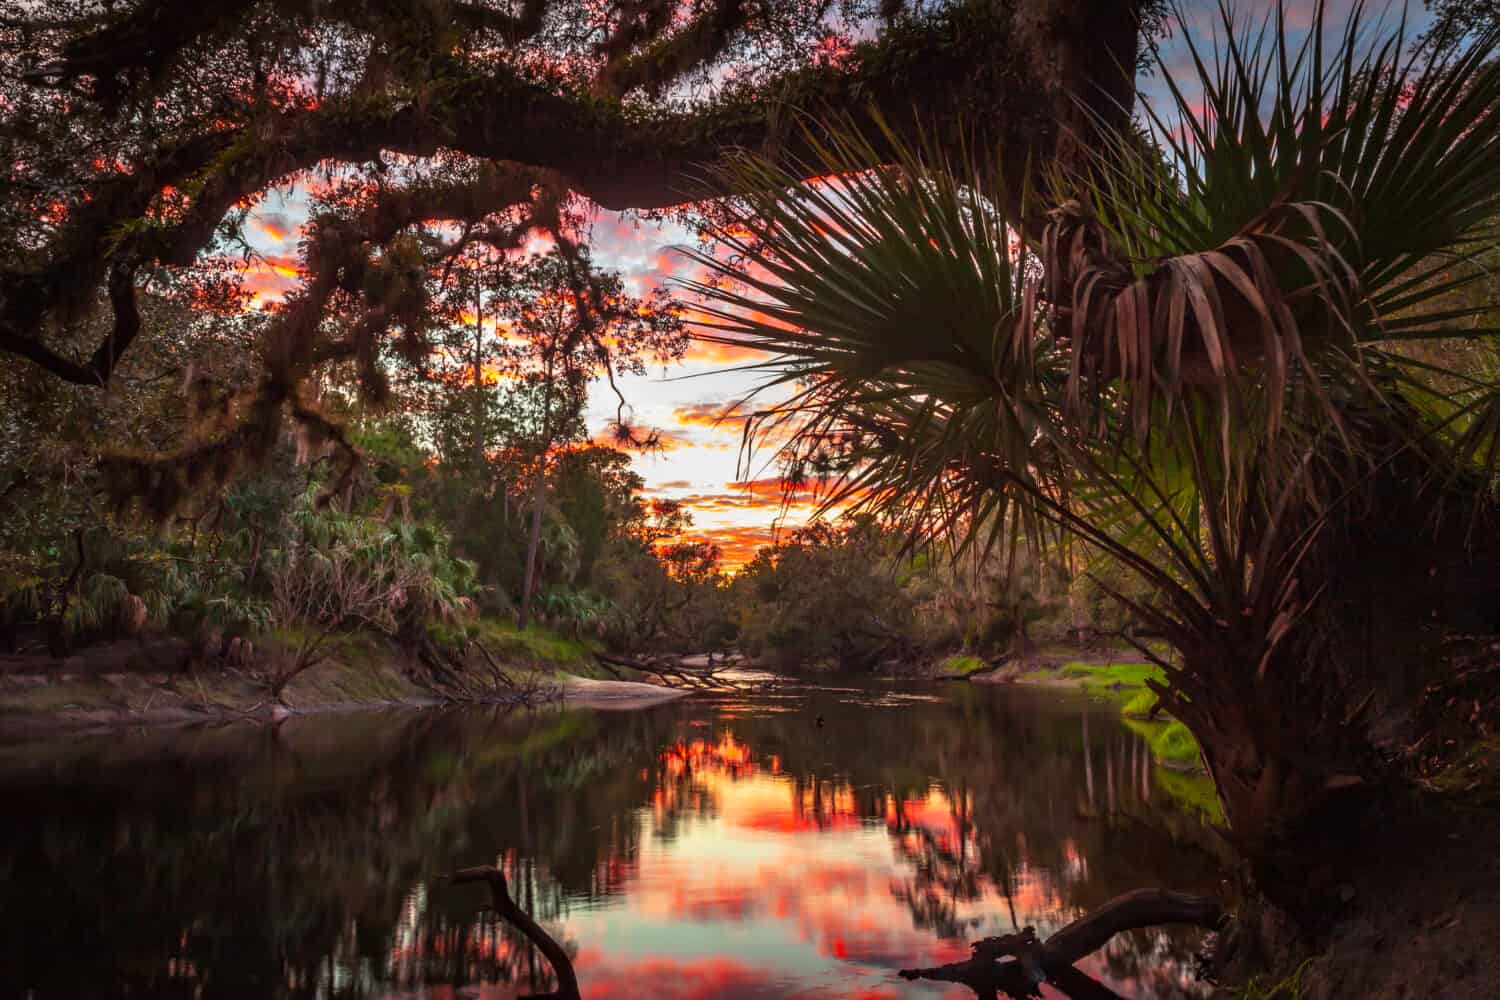 The sun sets over the Econlockhatchee, near Orlando in the Little Big Econ State Forest.